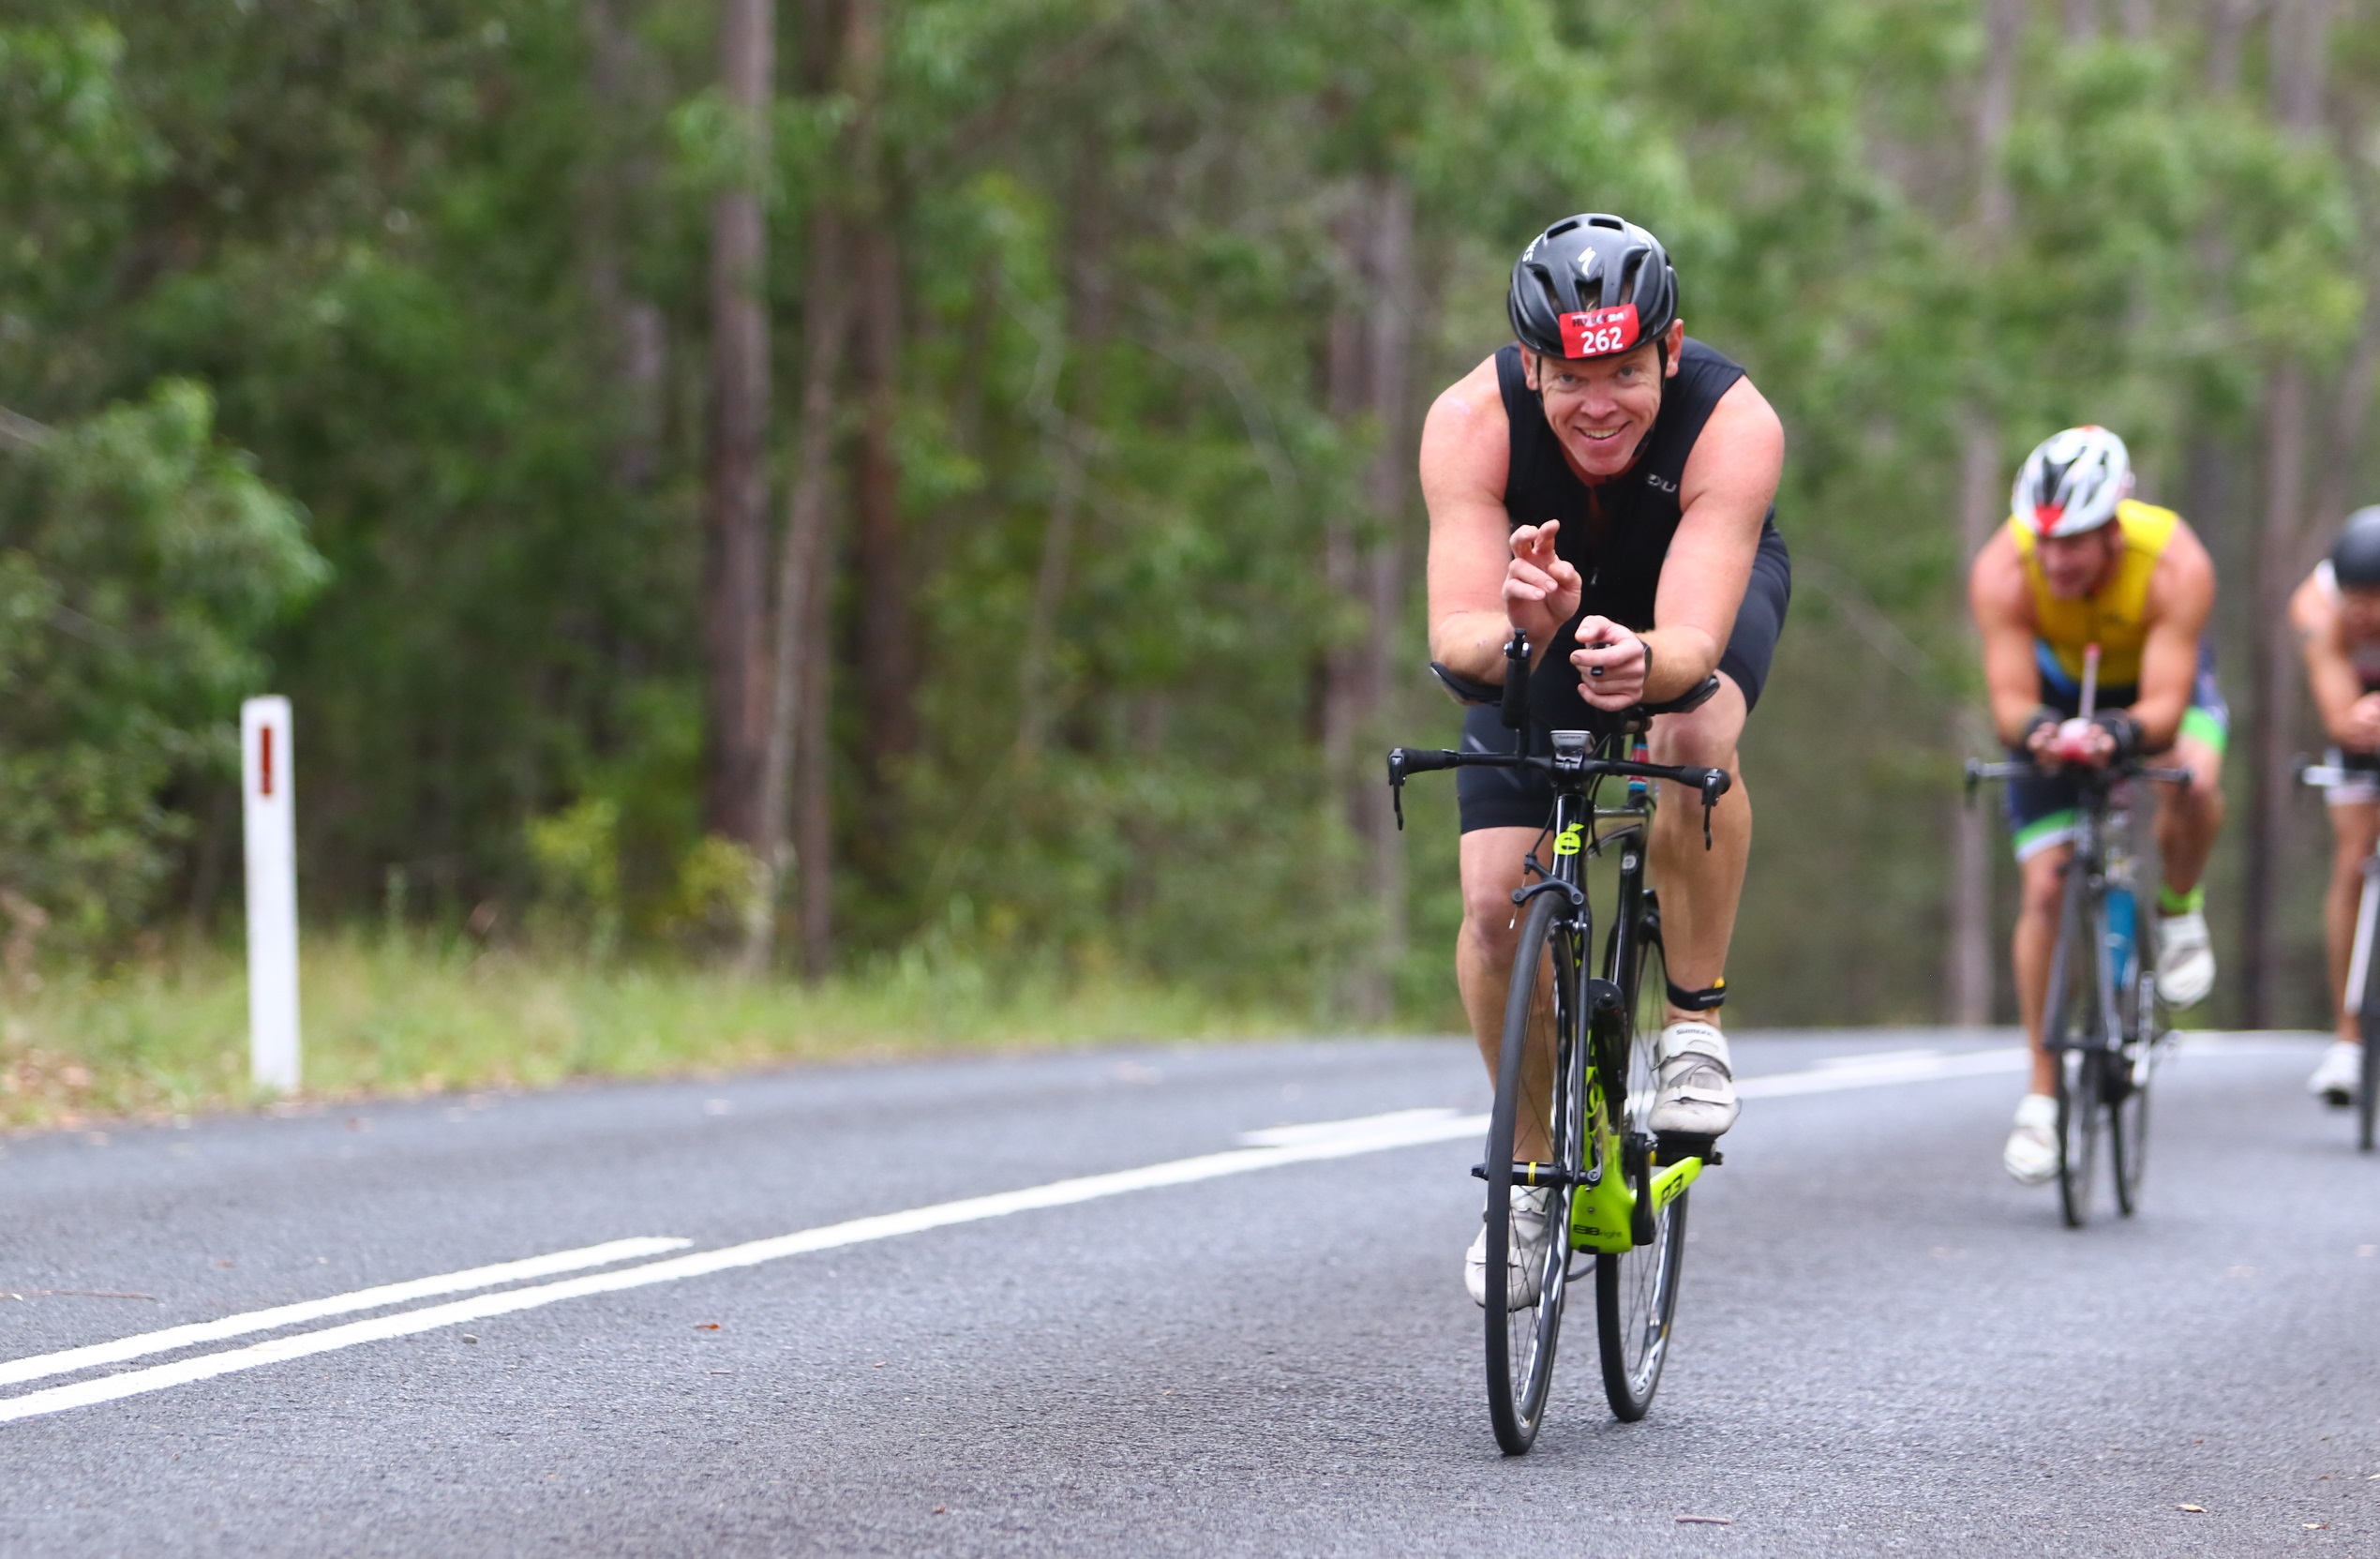 Put your fitness to the test at Goulburn's inaugural duathlon